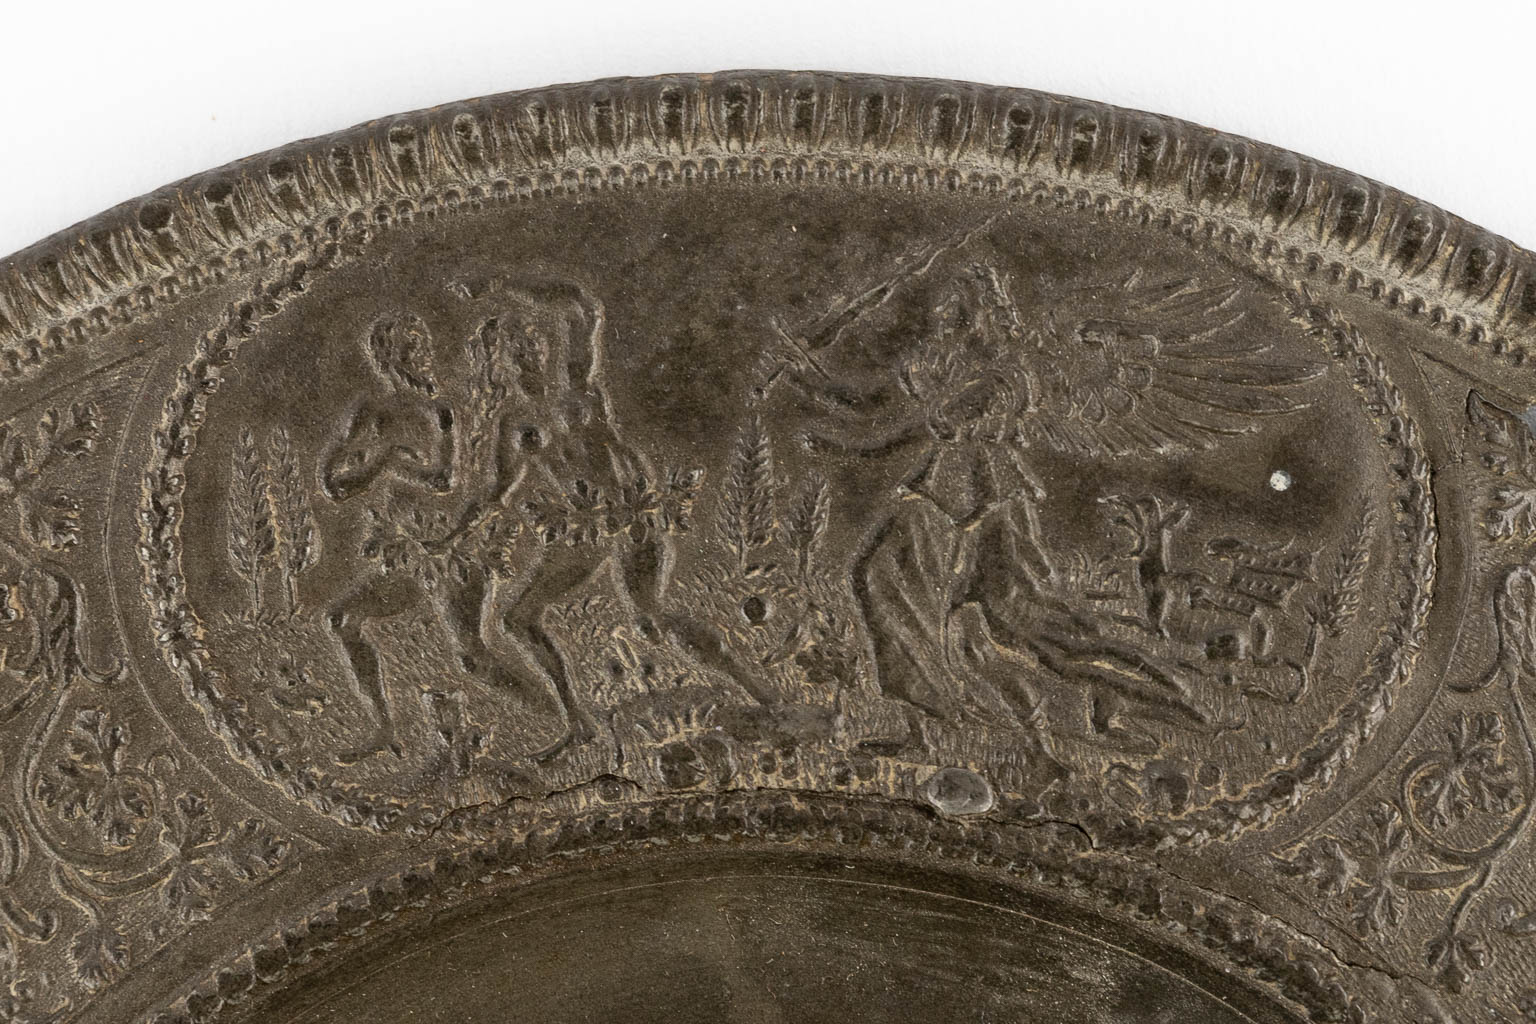 Paulus Oeham de Oude, Nuremberg, Germany. A relief plate, pewter. 17th C. (D:17,8 cm) - Image 6 of 11